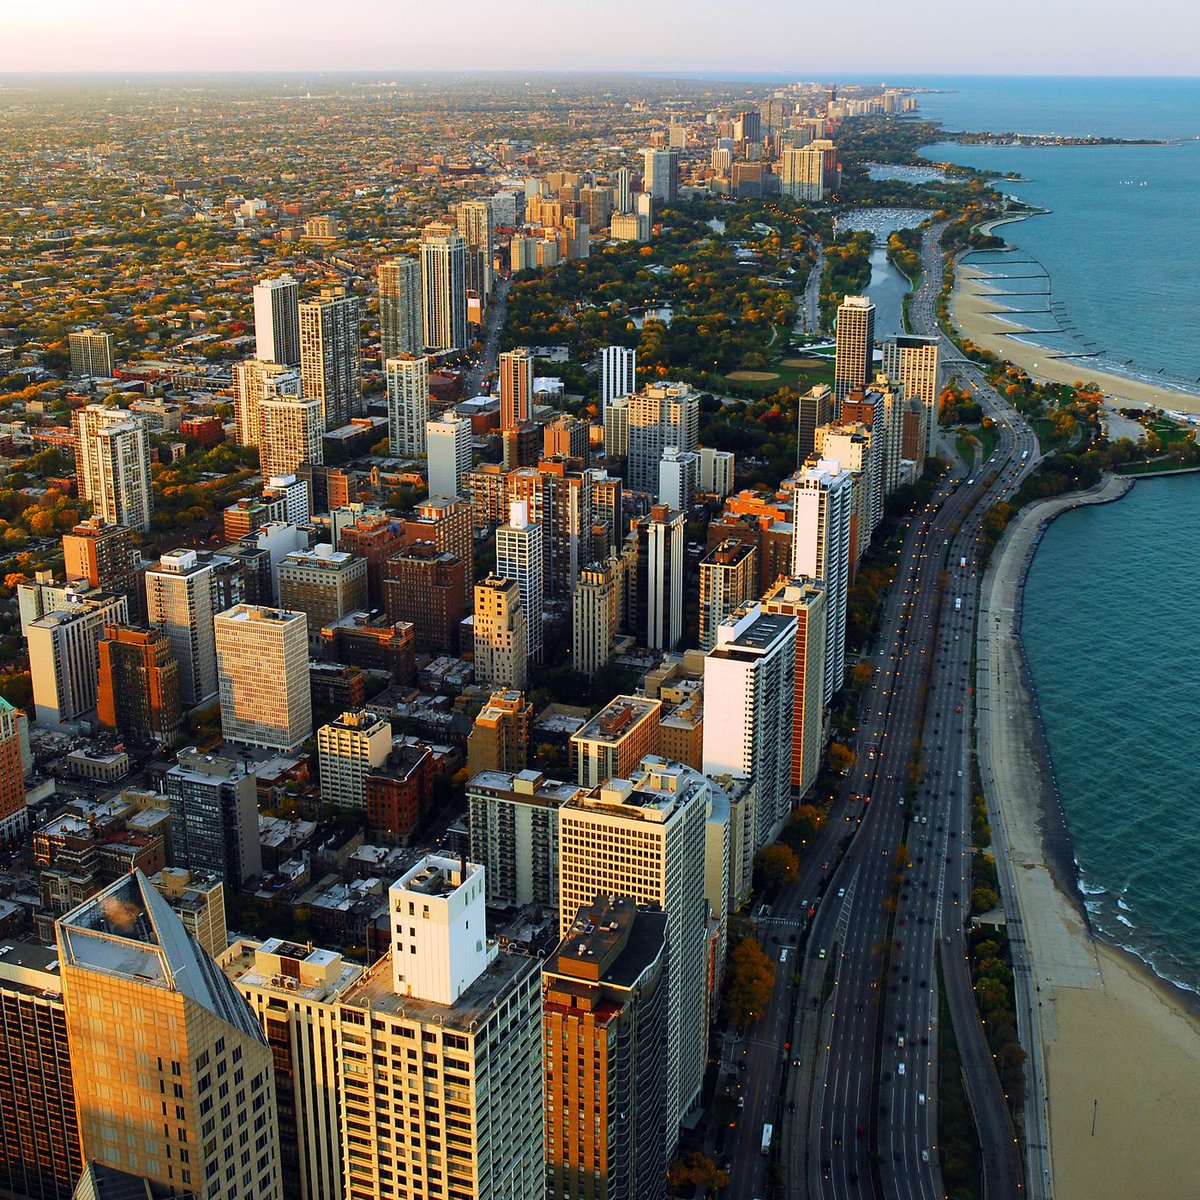 Chicago's beautiful Lakeshore Drive. Dense apartment complexes constructed for miles, almost right up to the waterfront. Relatively affordable. Long stretches of public beach, accessible by underpass. RT to scare the California Coastal Commission.